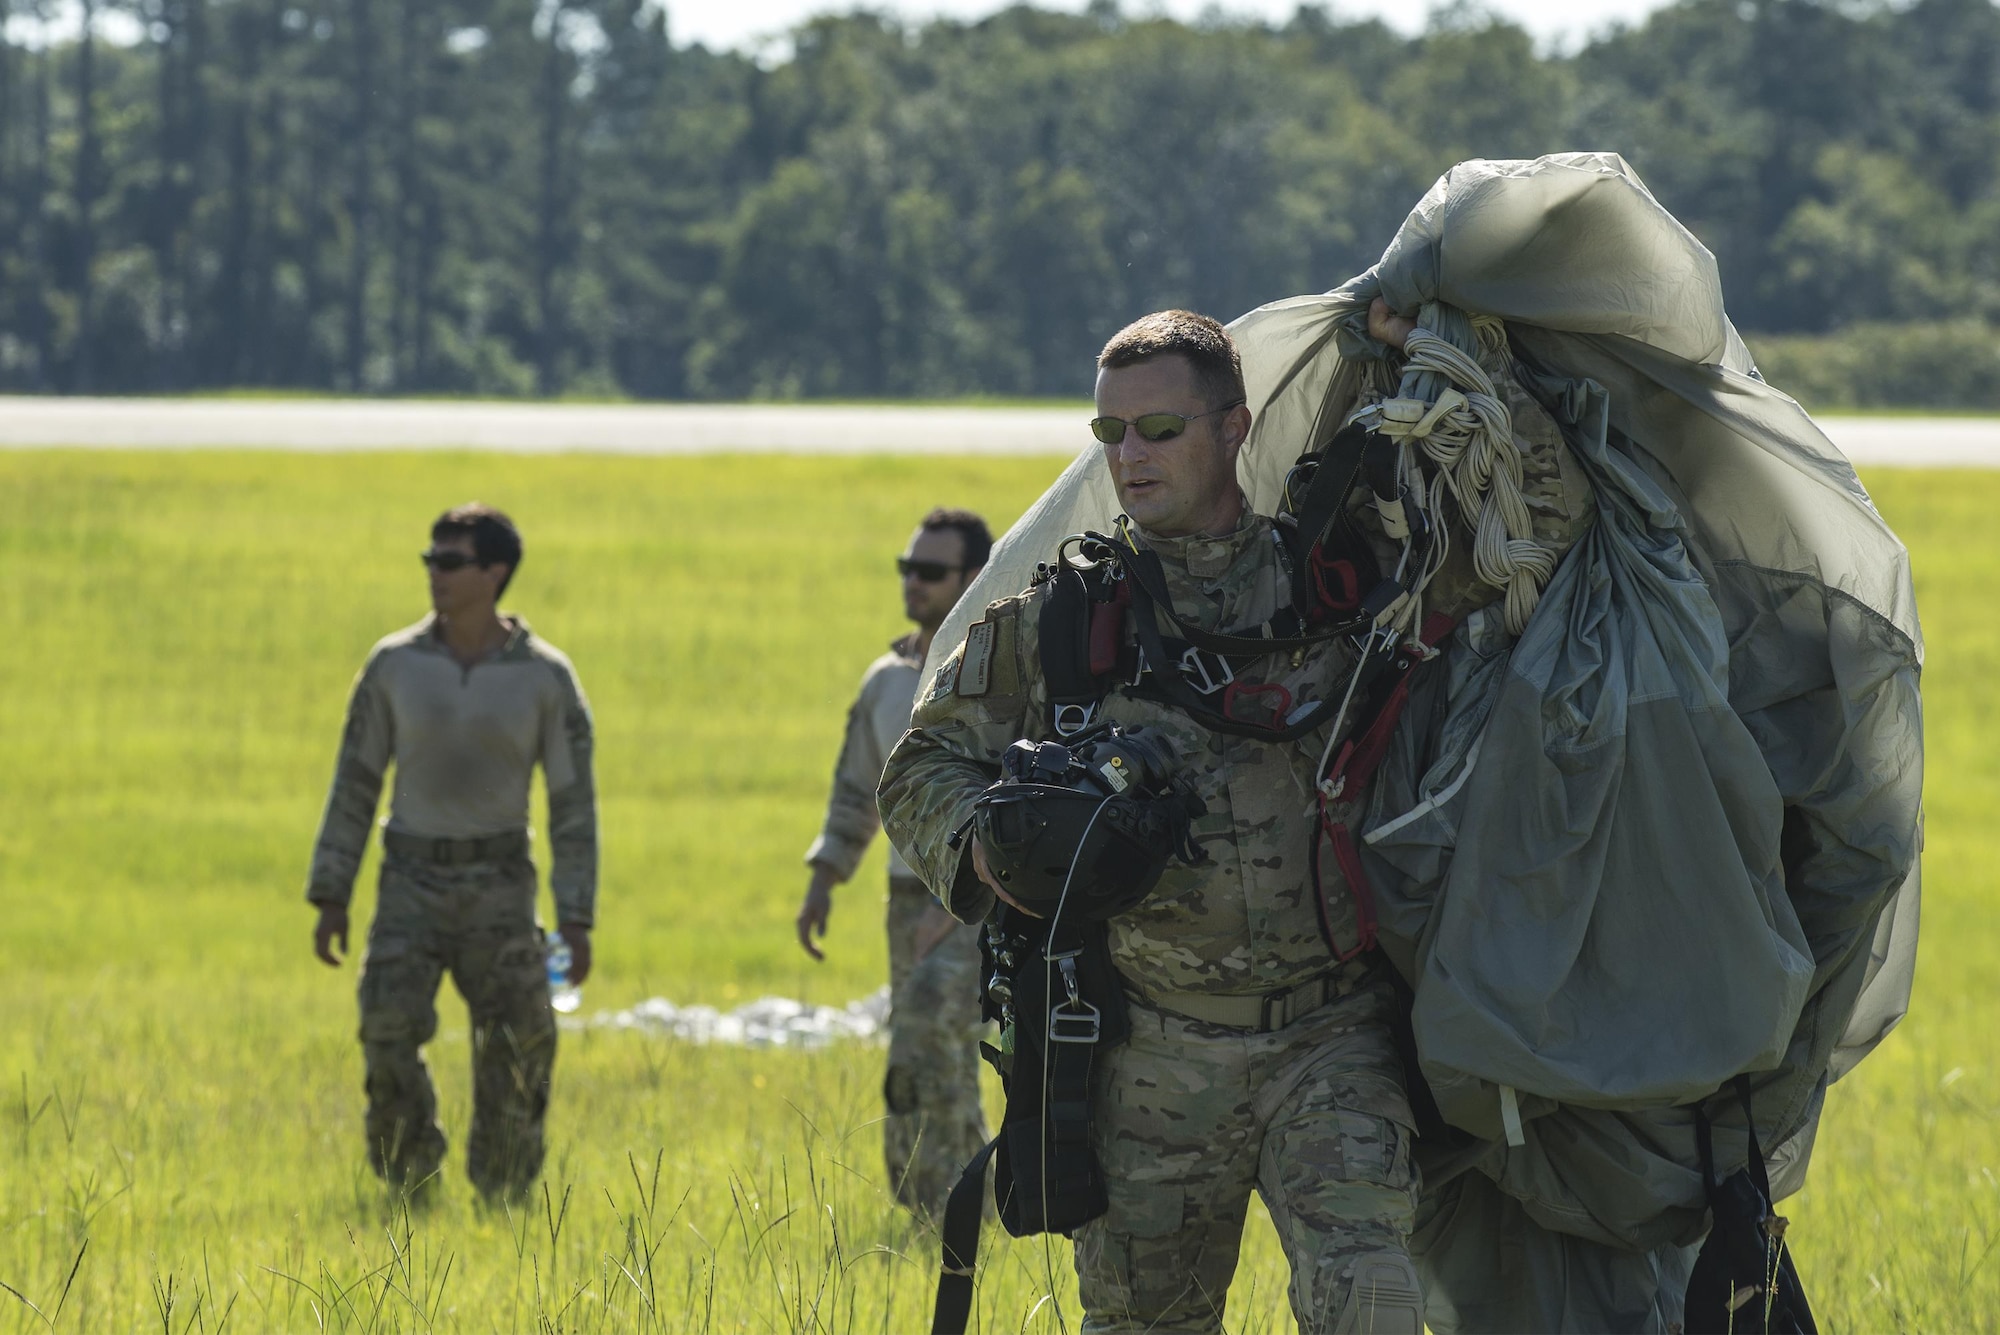 U.S. Air Force Senior Master Sgt. Kenneth Marshall, 38th Rescue Squadron pararescueman, carries his parachute after landing from a high-altitude, low-opening jump, Aug. 18, 2016, at Moody Air Force Base, Ga. The jump was conducted to re-familiarize aircrew and pararescue members with procedures for dropping from a high altitude and to ensure proficiency. (U.S. Air Force photo by Airman 1st Class Daniel Snider)
